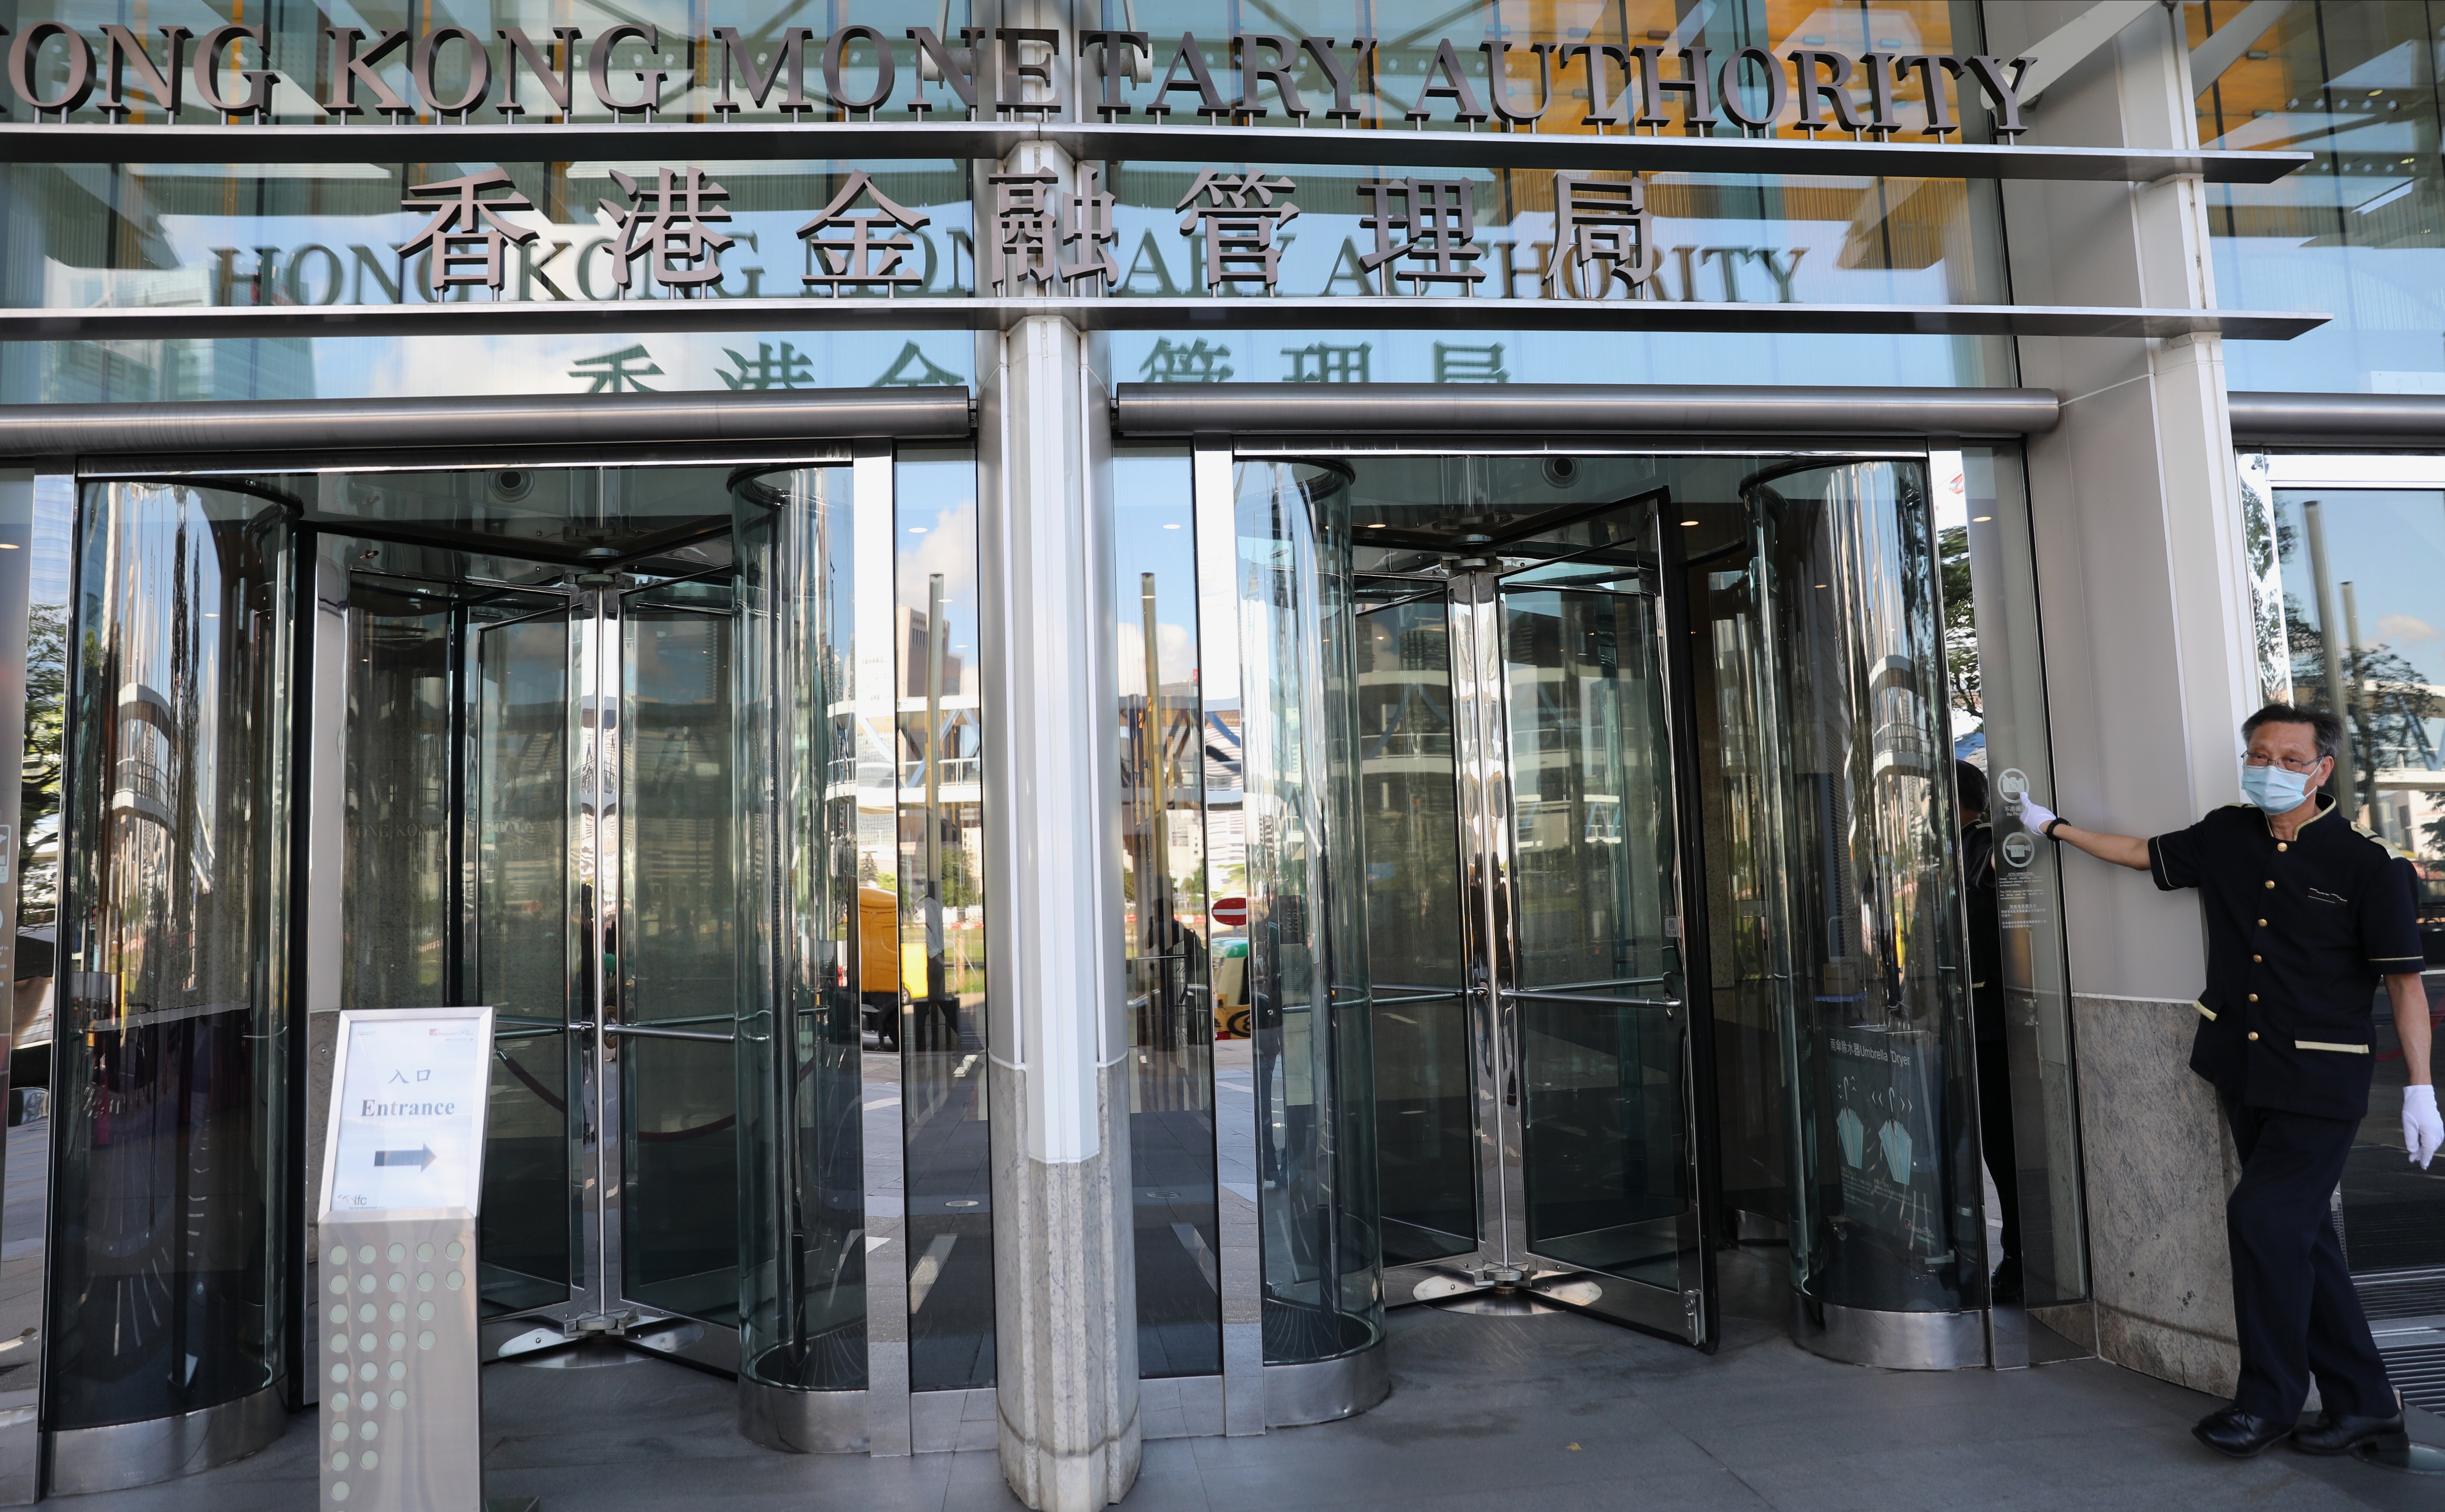 The entrance to the Hong Kong Monetary Authority office at International Financial Centre, Central. Photo: Nora Tam